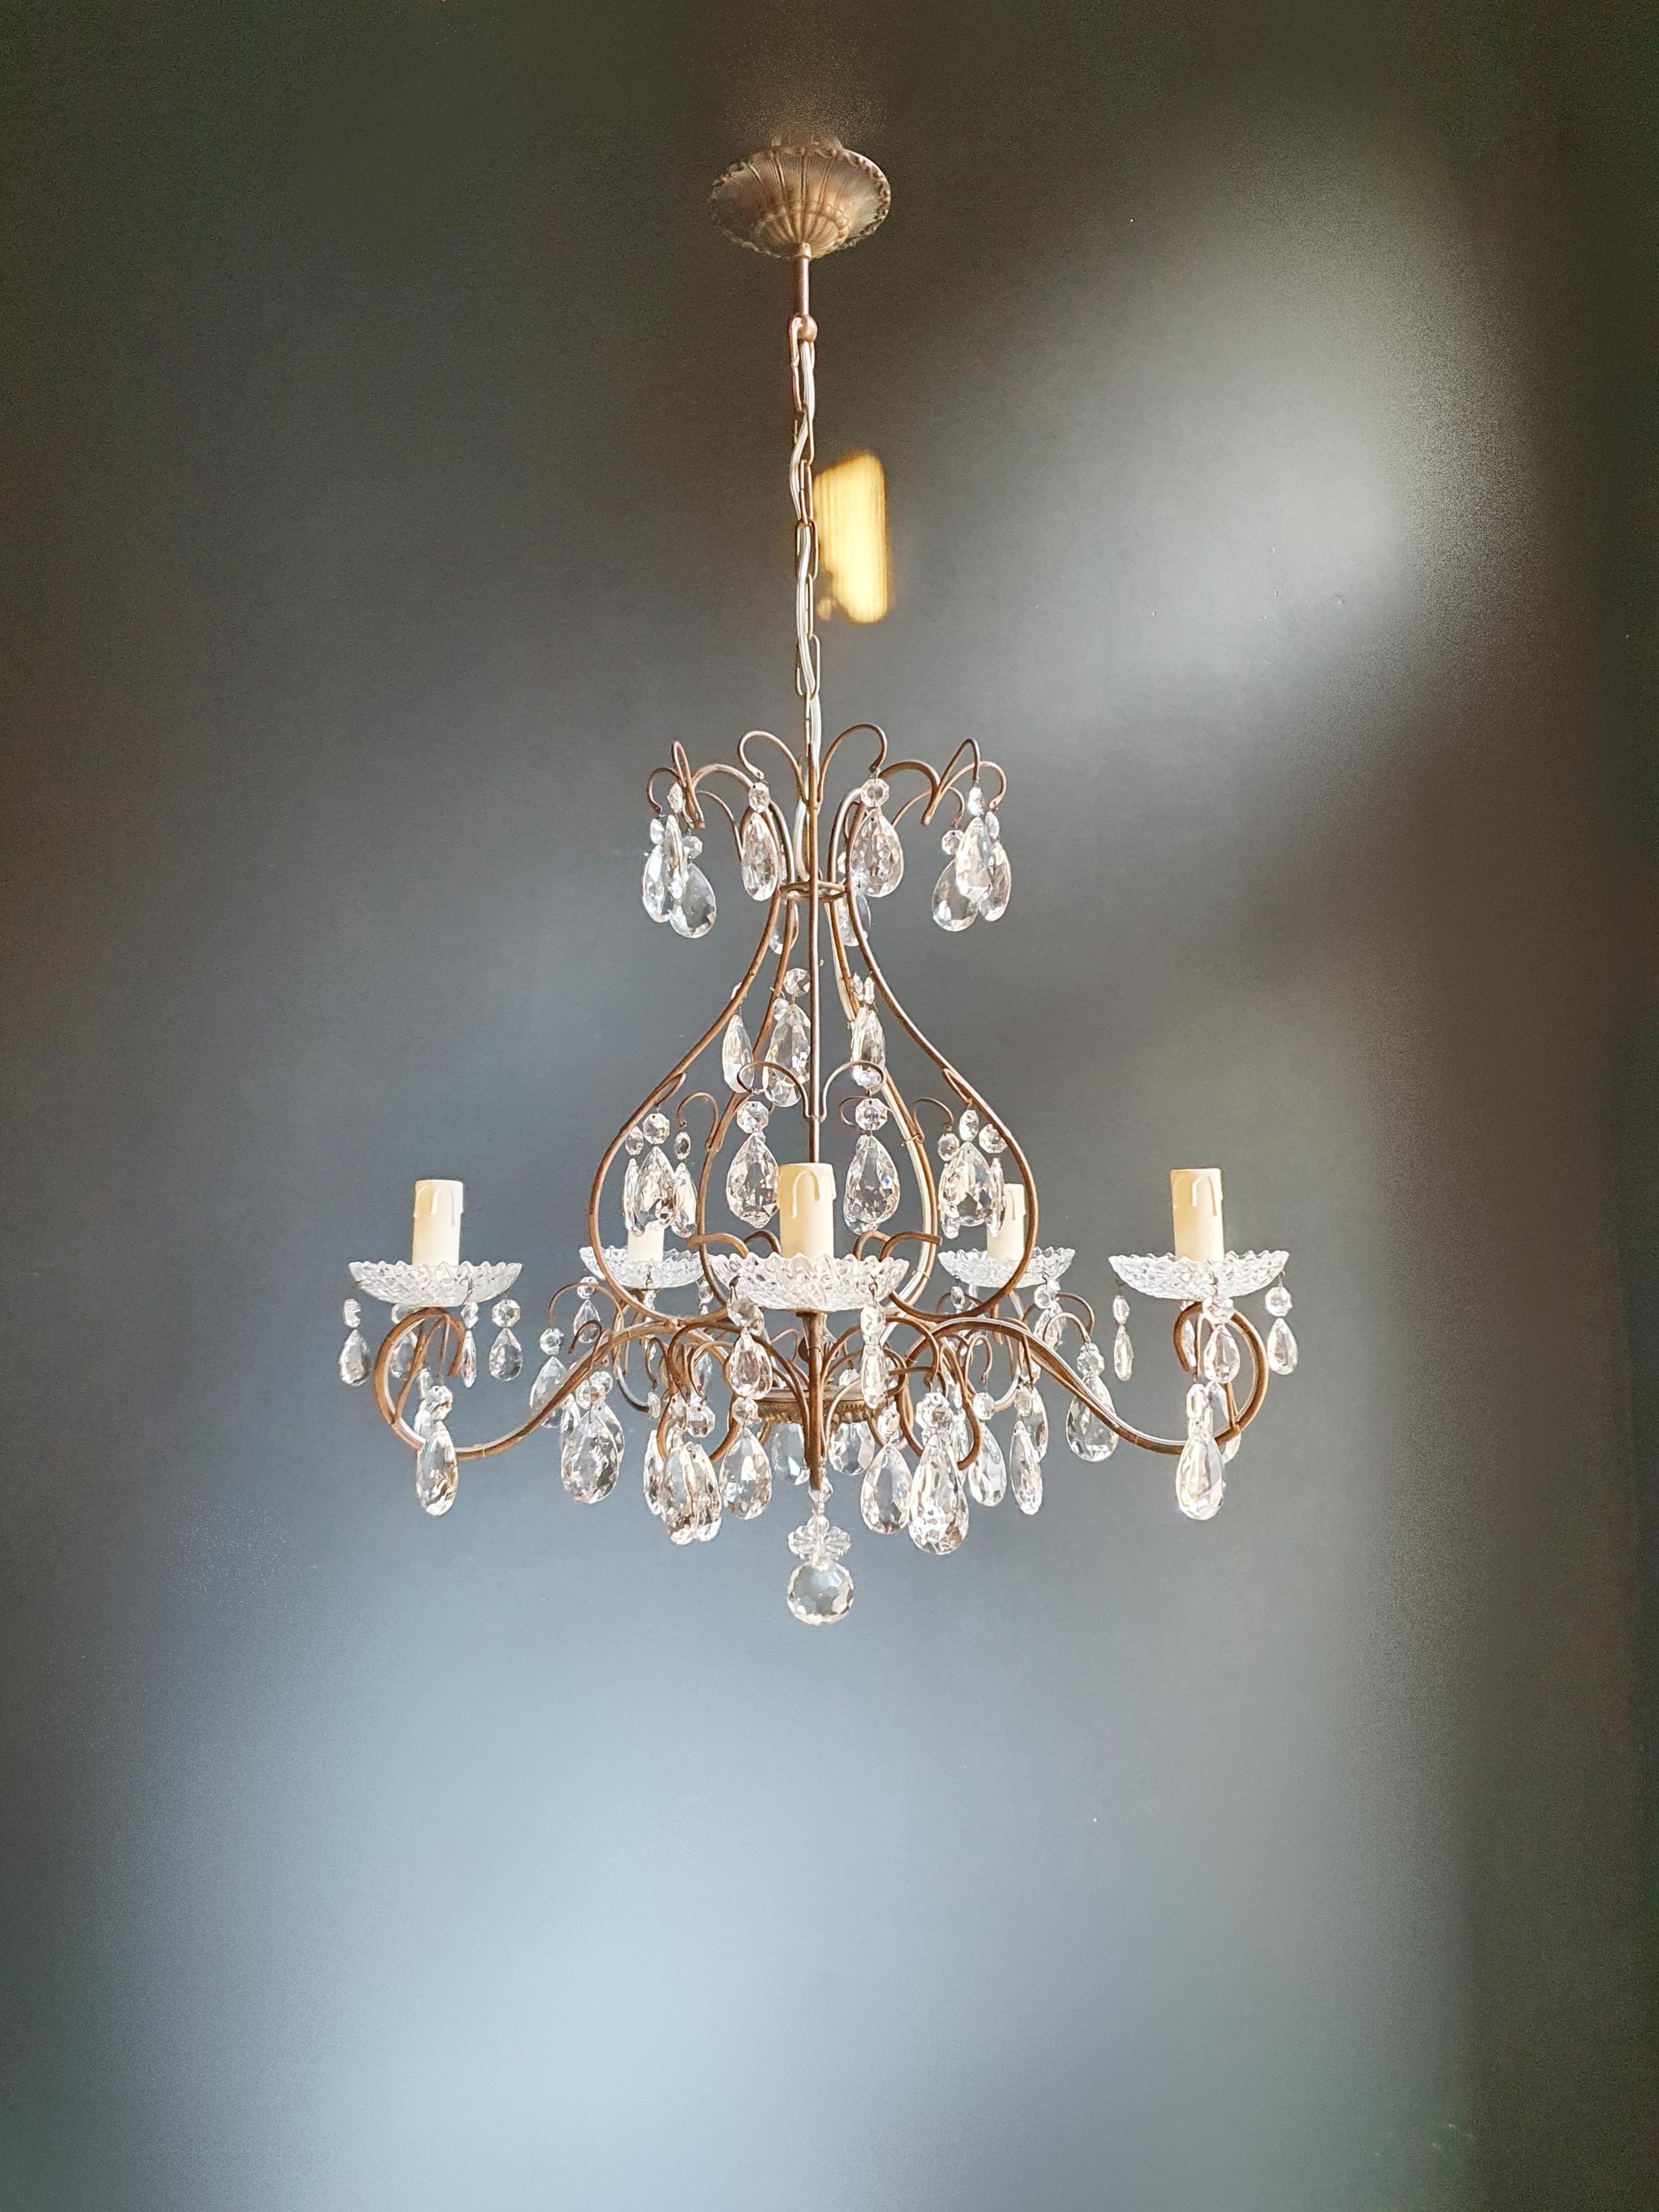 Original preserved chandelier, circa 1940. Cabling and sockets completely renewed. Crystal hand knotted
Measures: Total height 90 cm, height without chain 52 cm, diameter 54 cm, weight (approximately) 6 kg.

Number of lights: Five-light bulb